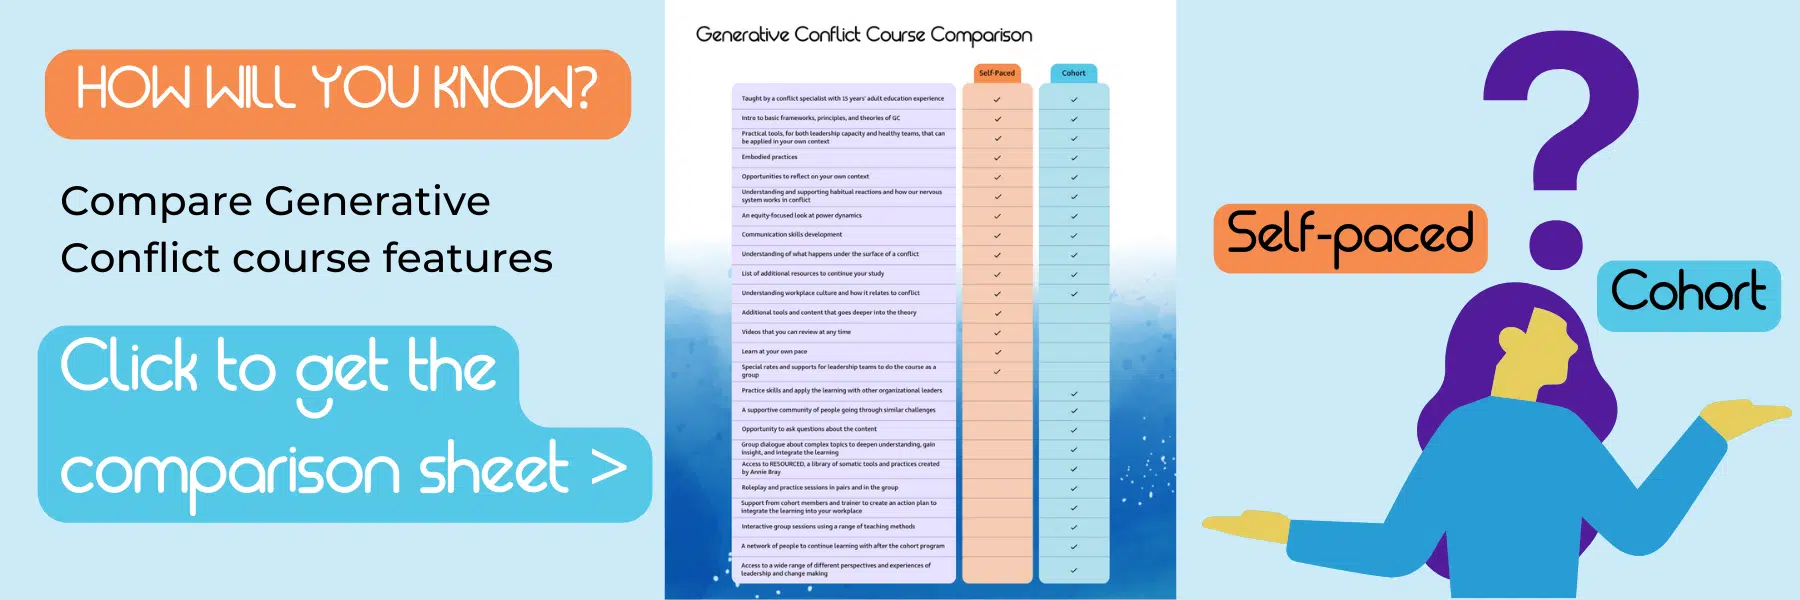 link to comparison sheet of self-paced and cohort versions of Generative Conflict courses